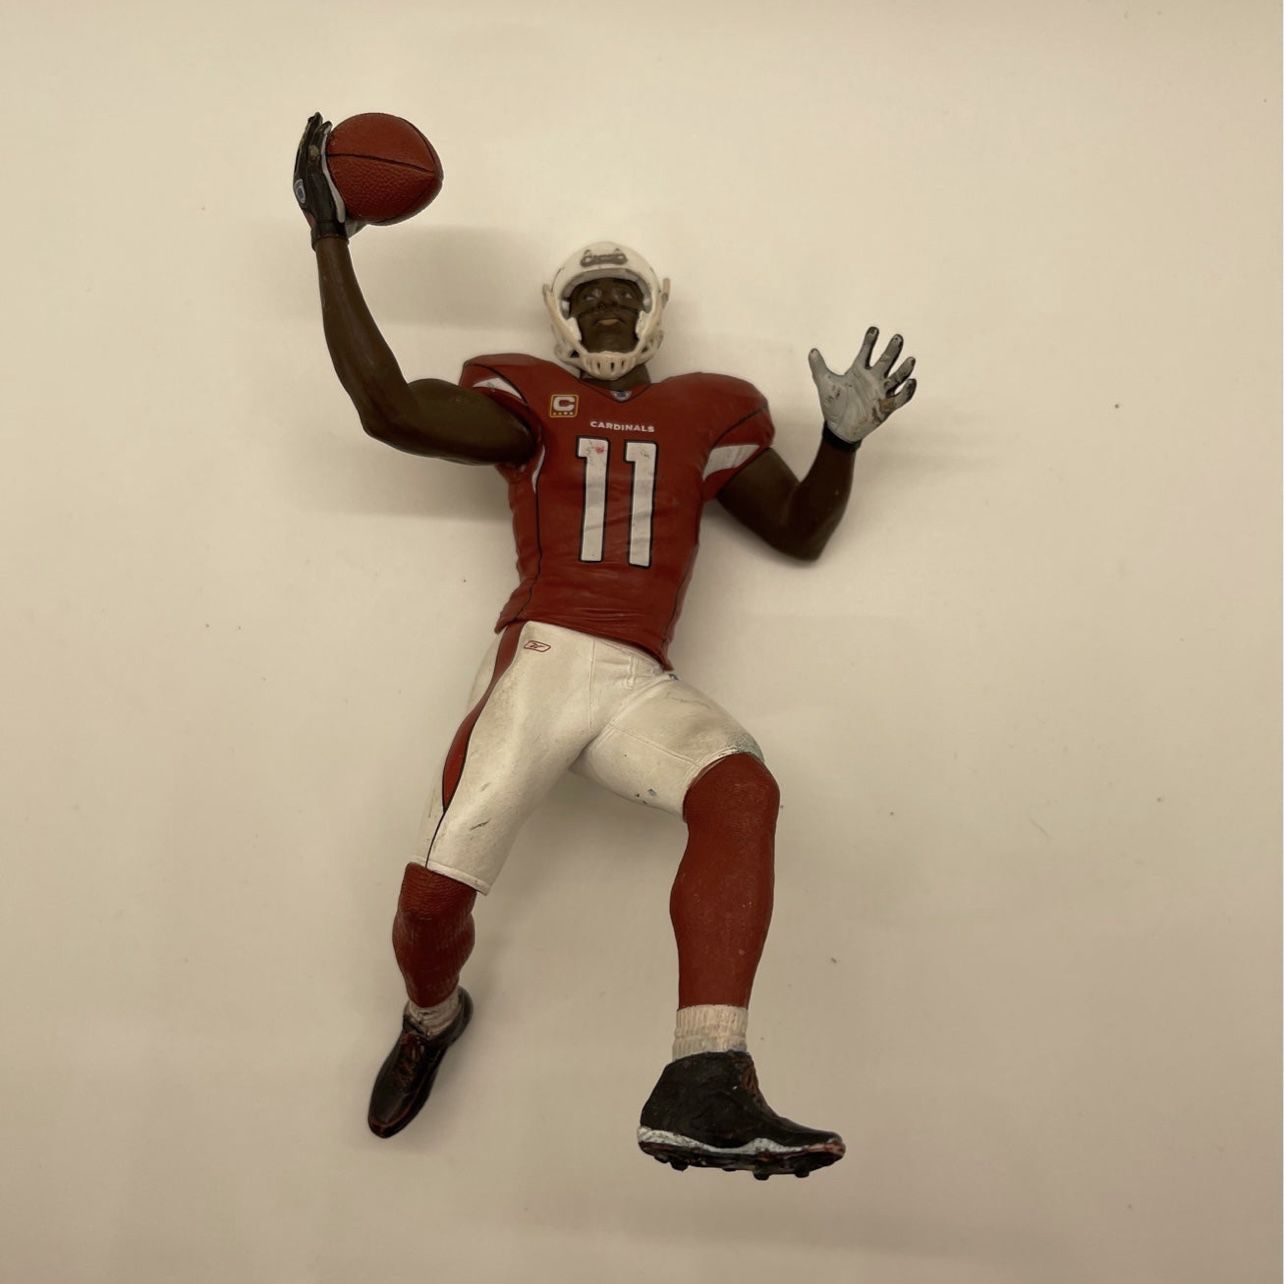 Larry Fitzgerald Arizona Cardinals Action Figure for Sale in Suprstitn  Mountain, AZ - OfferUp